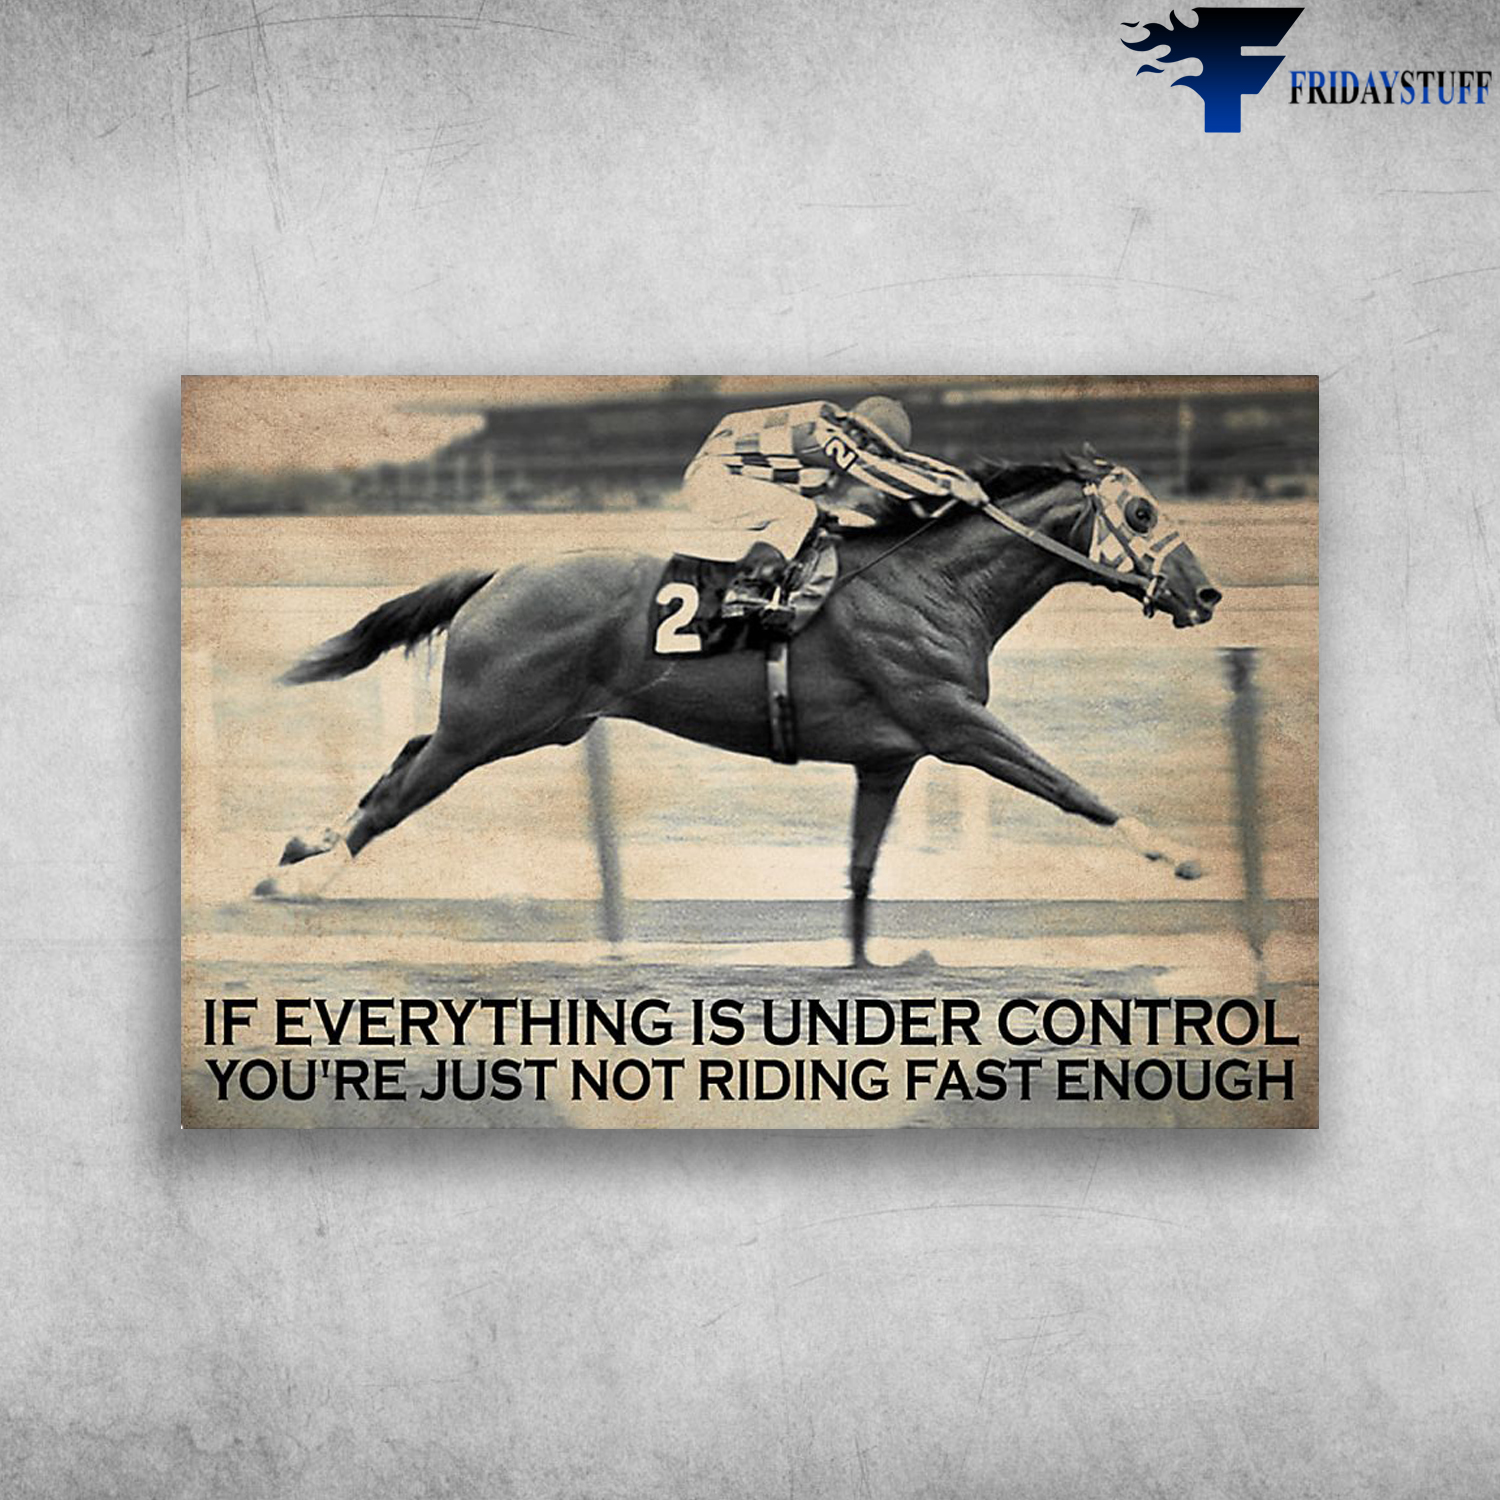 Man Racing Horse - If Everything Is Under Control, You're Just Not Riding Fast Enough